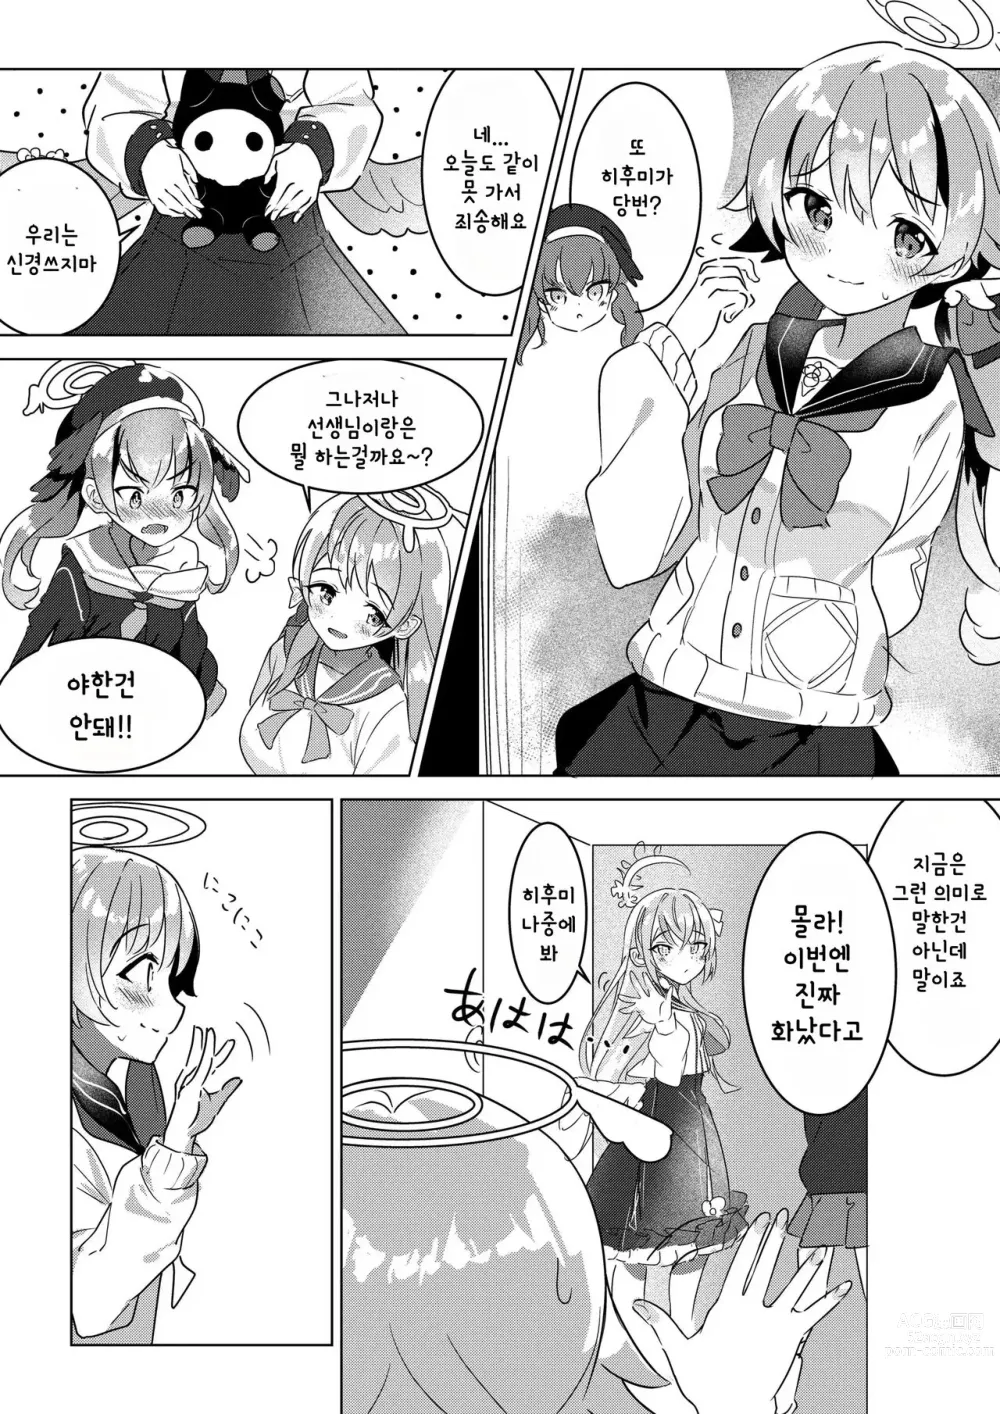 Page 1 of doujinshi 당번인 히후미와 H